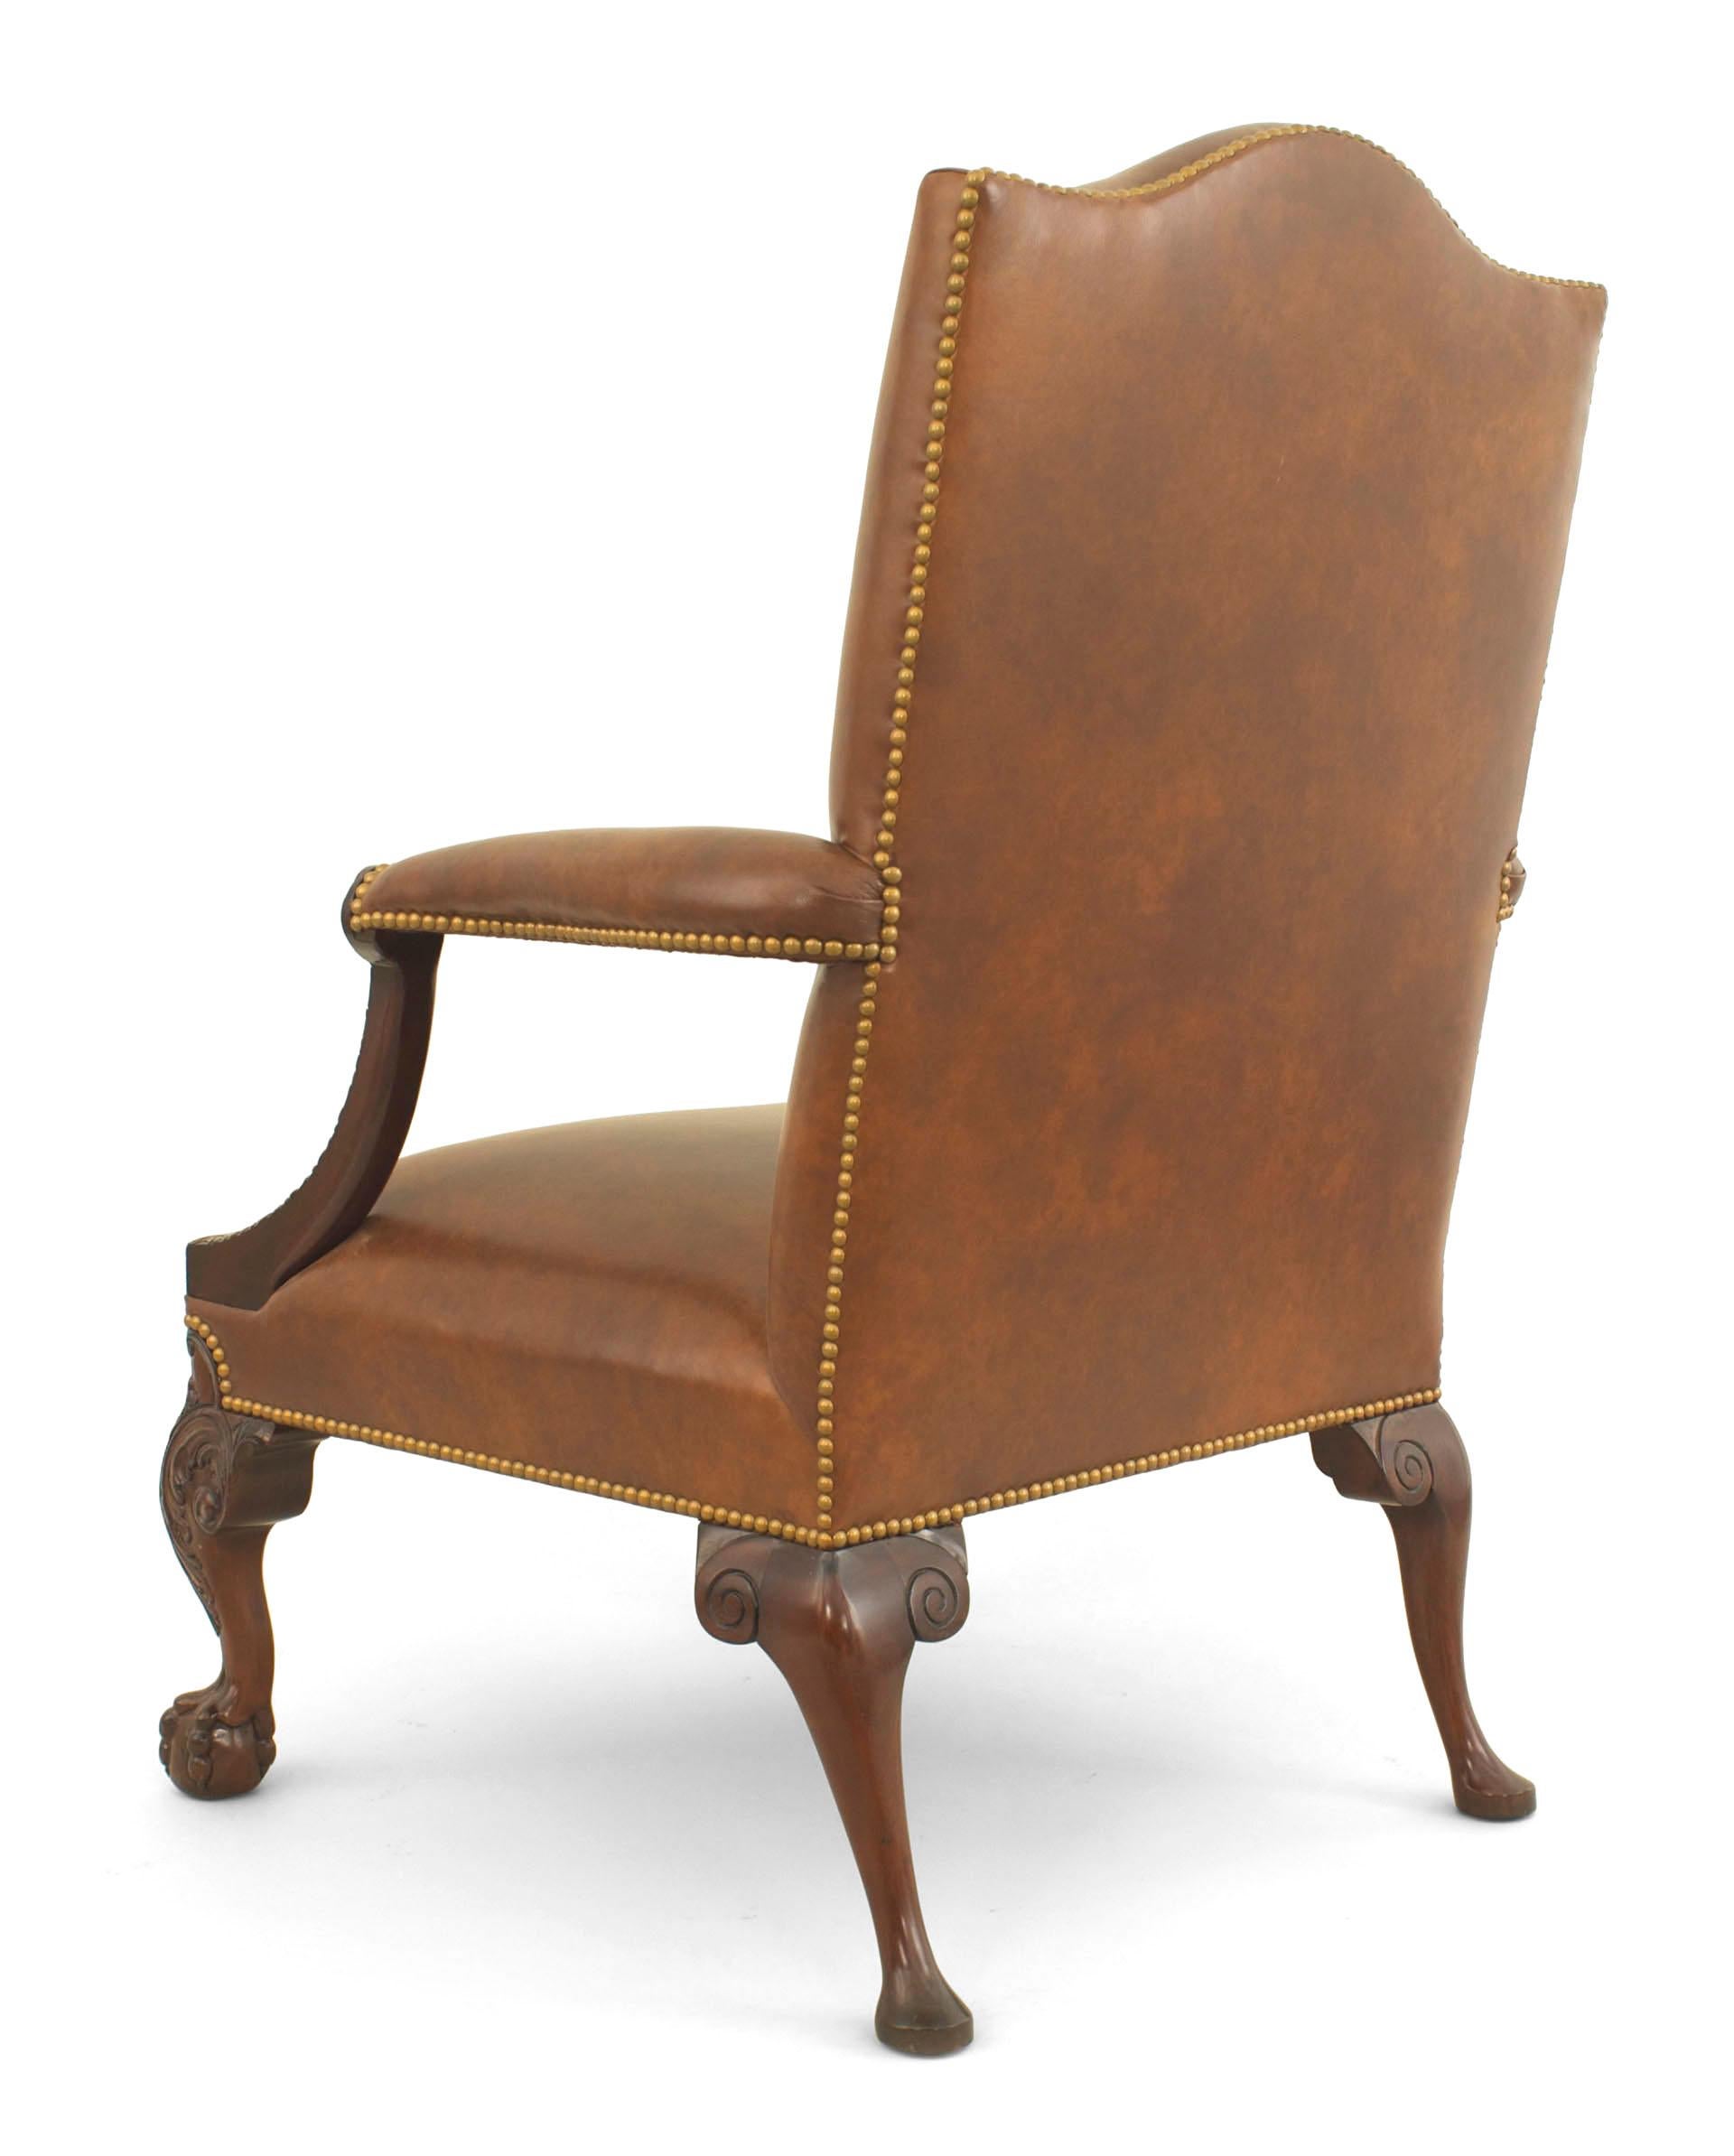 English Chippendale style (modern) mahogany carved open armchair with a shaped back and upholstered in brown leather with a cushion seat.
 